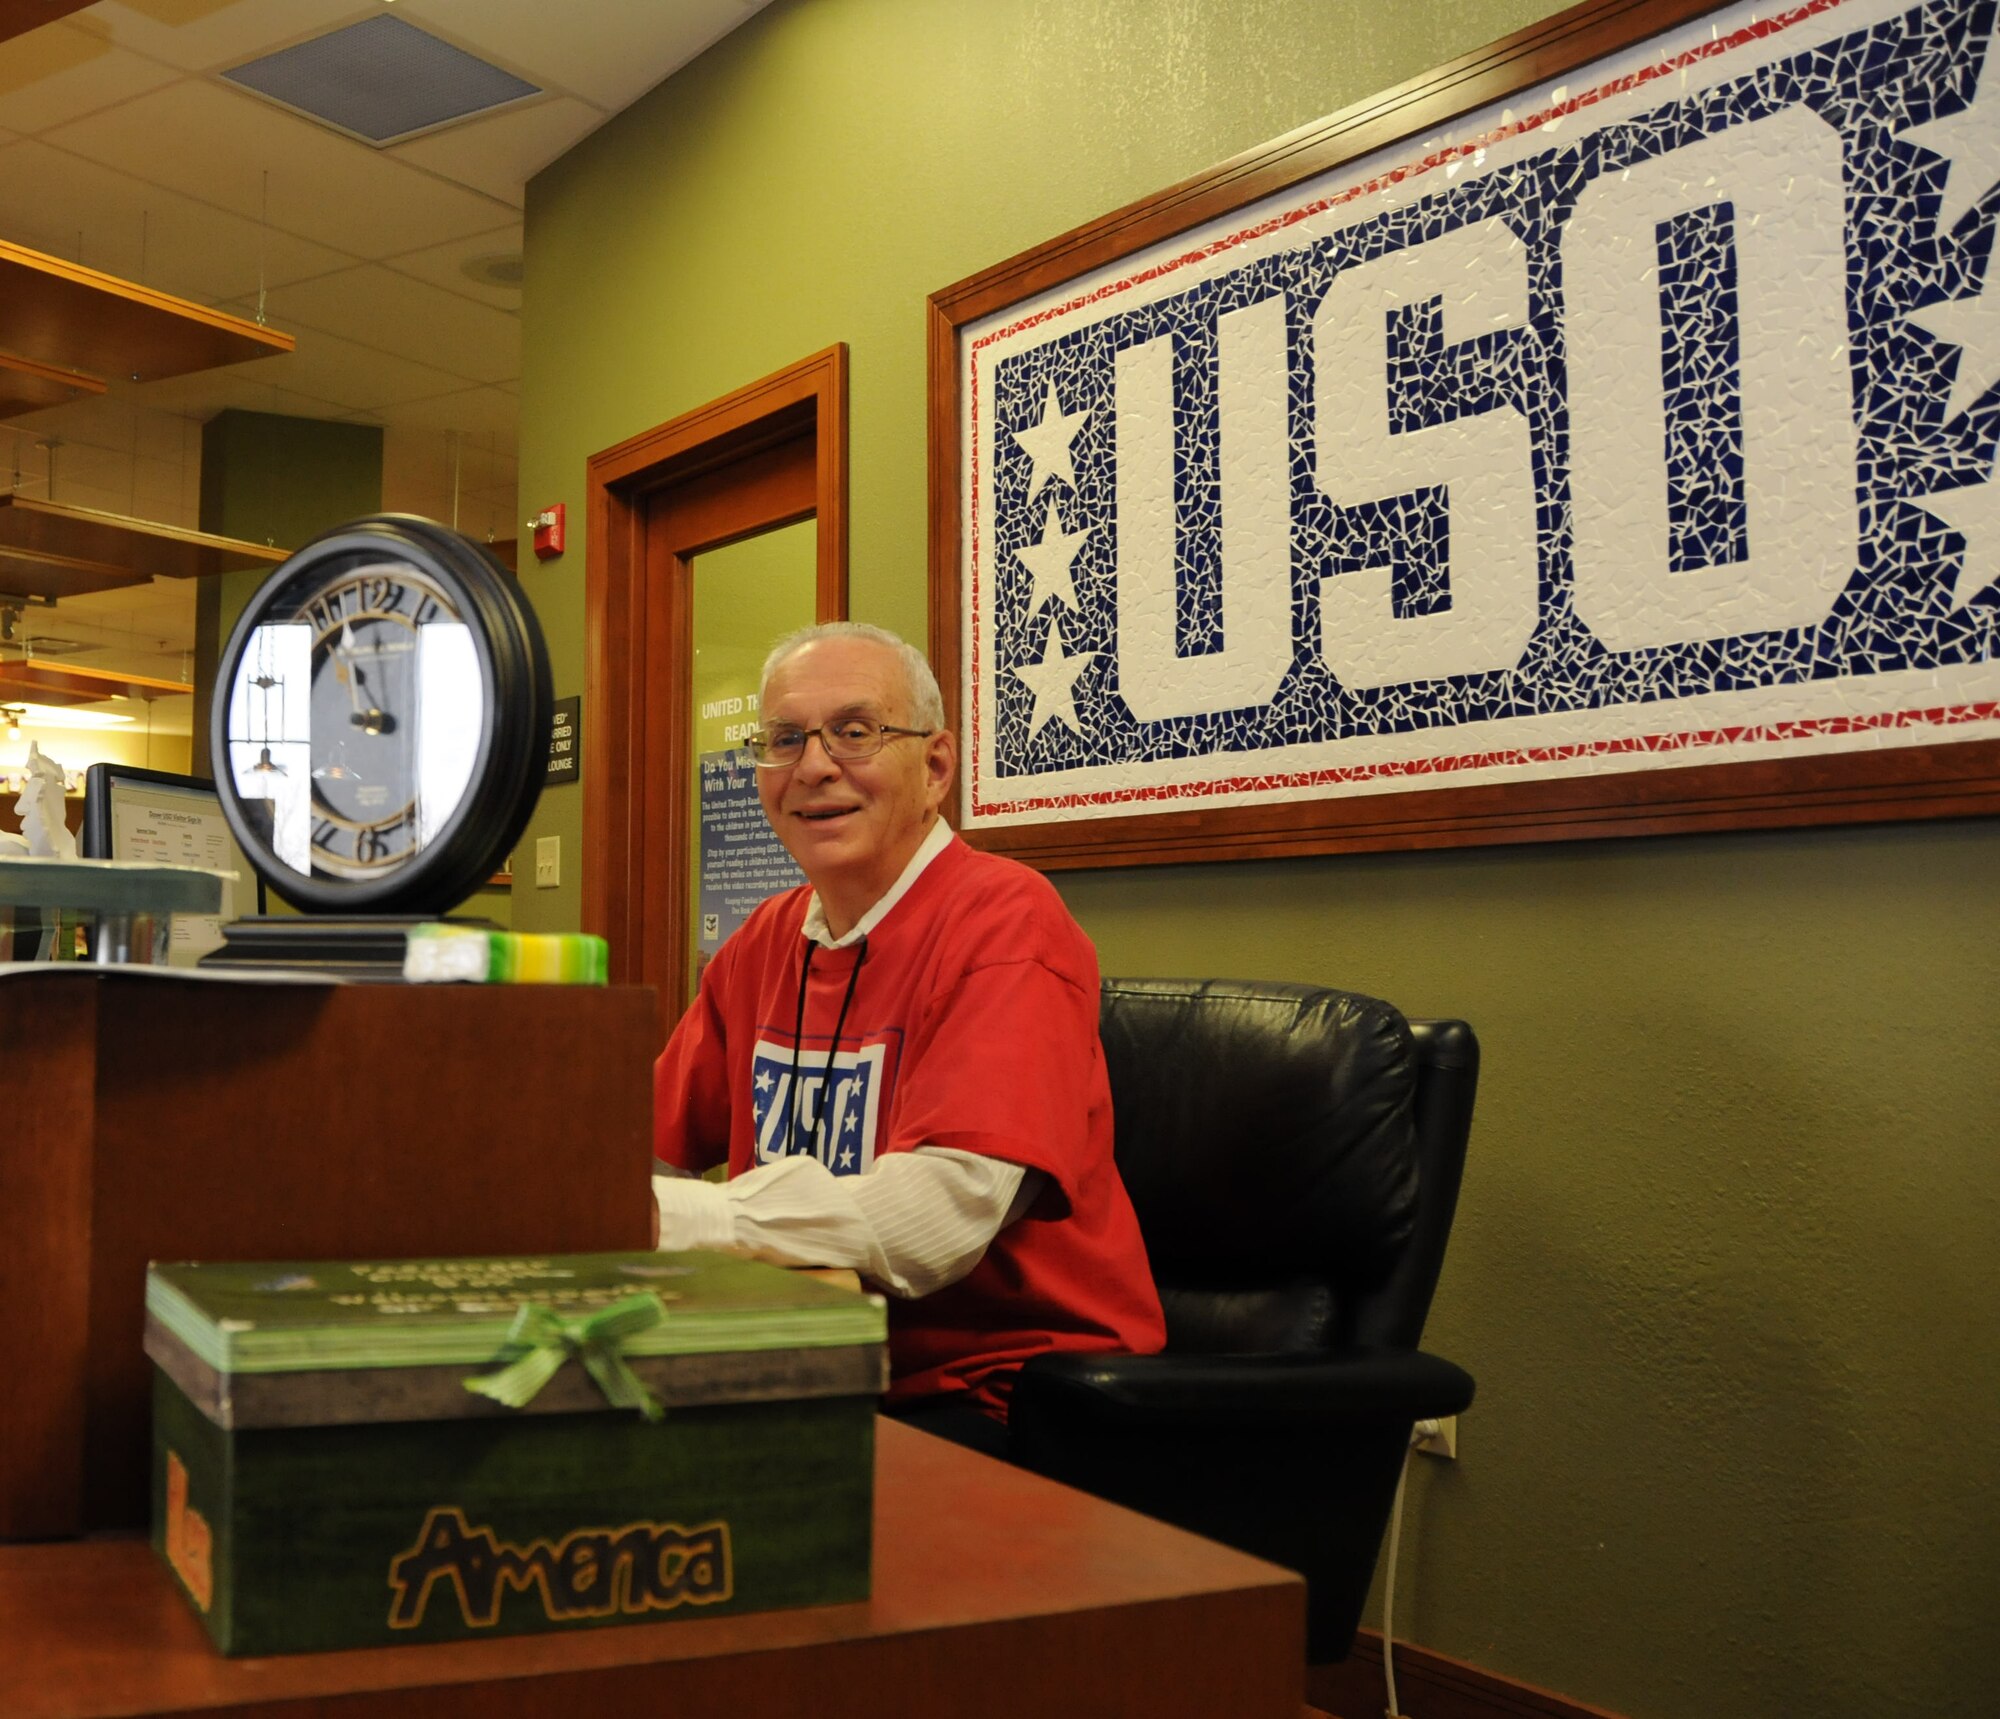 USO volunteer John Guy sits at a welcome desk where he greets visitors and their families at the USO Delaware center Feb. 22, 2013. The number of USO Delaware active volunteers has more than doubled in the past two and a half years. (U.S. Air force photo by Senior Airman Joe Yanik/Released)